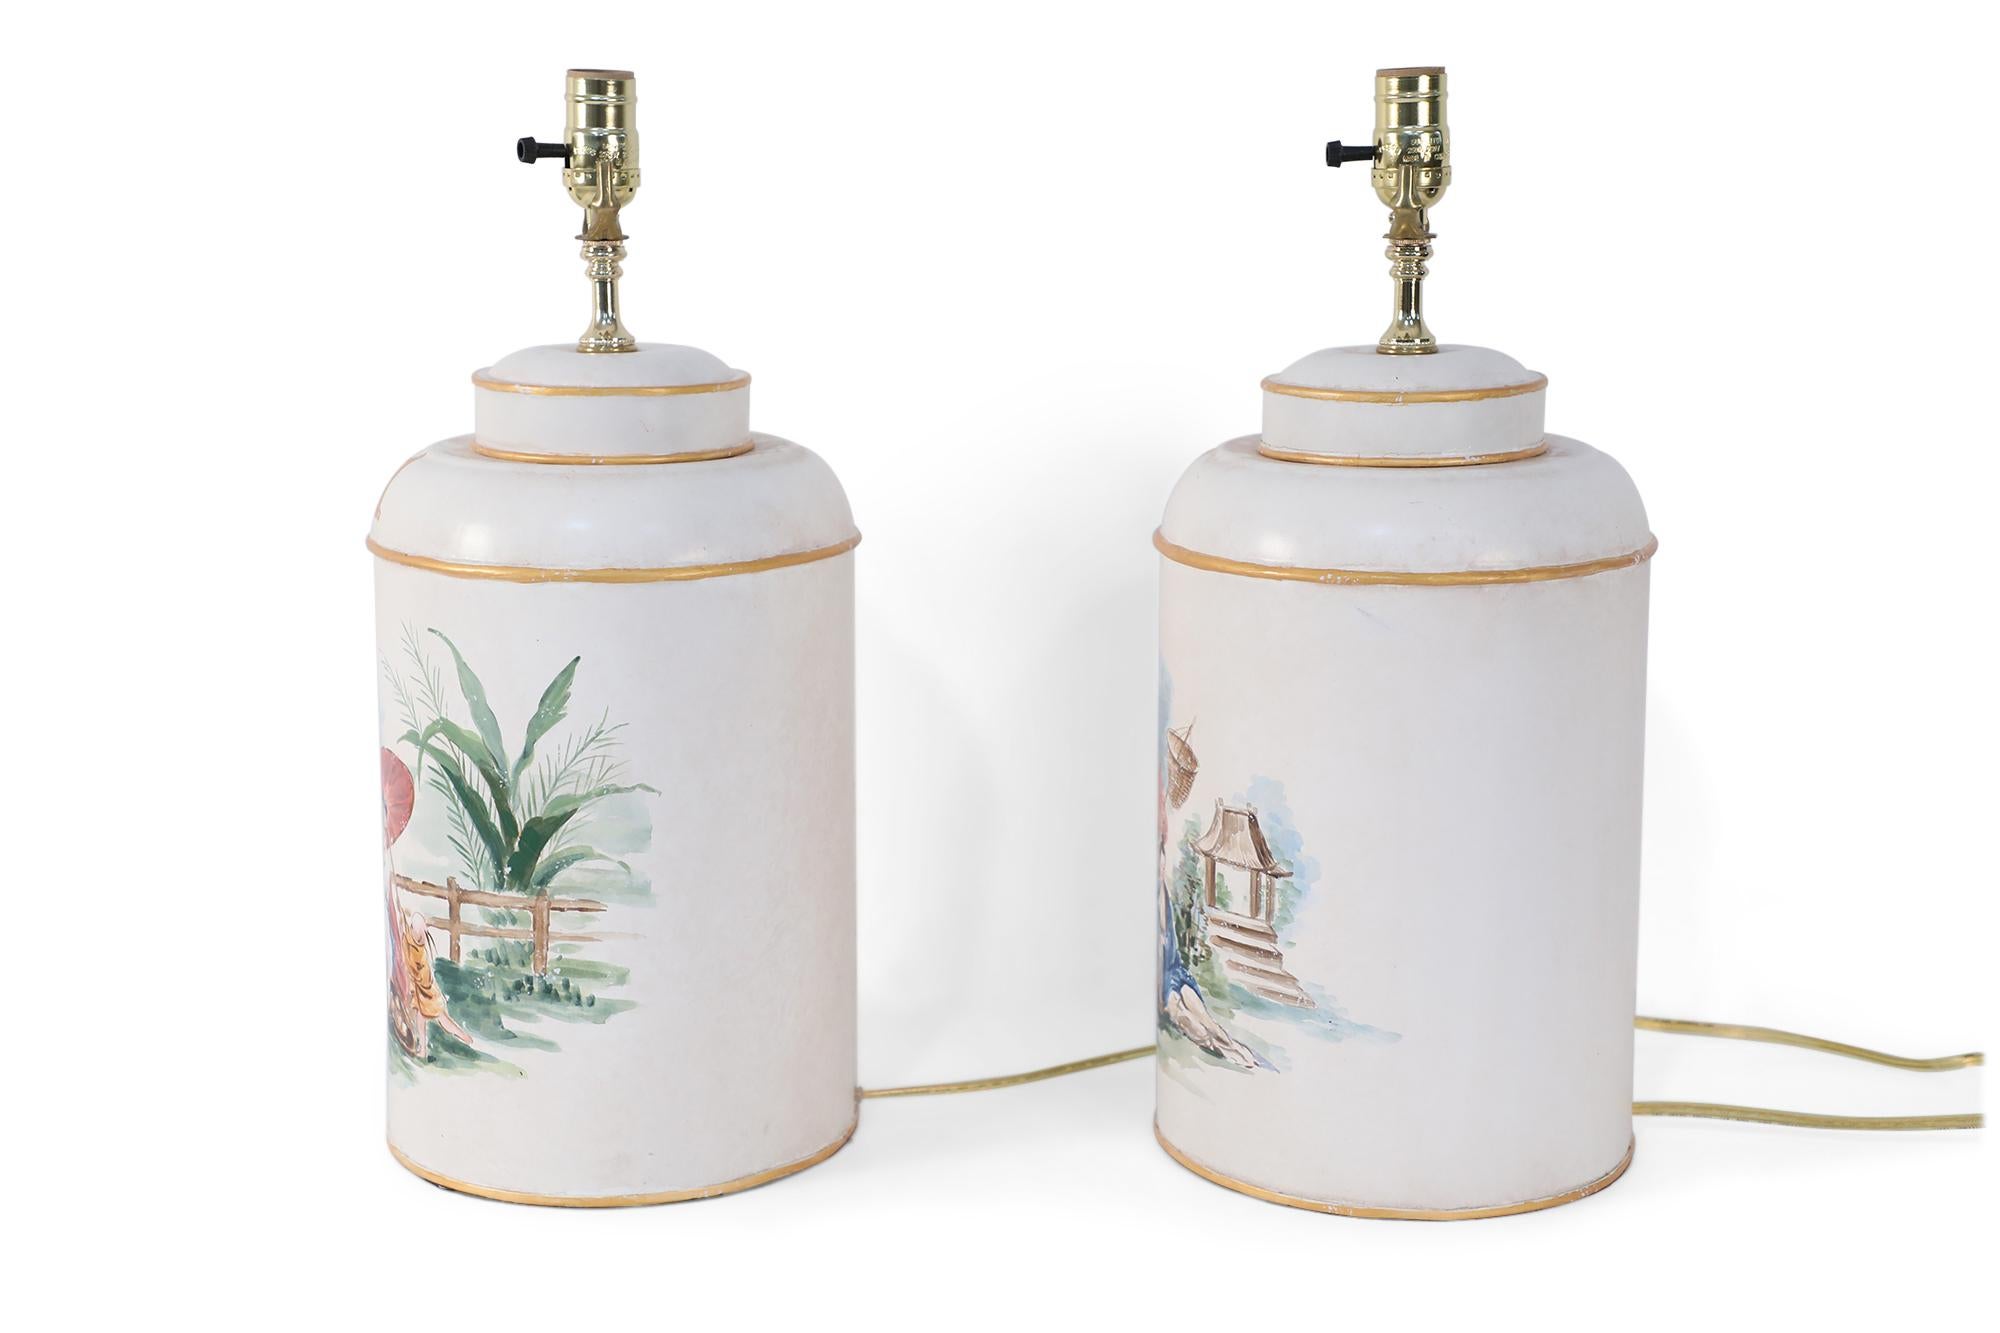 Rococo Revival Pair of Vintage Hand Painted Tole Genre Scene Table Lamps For Sale